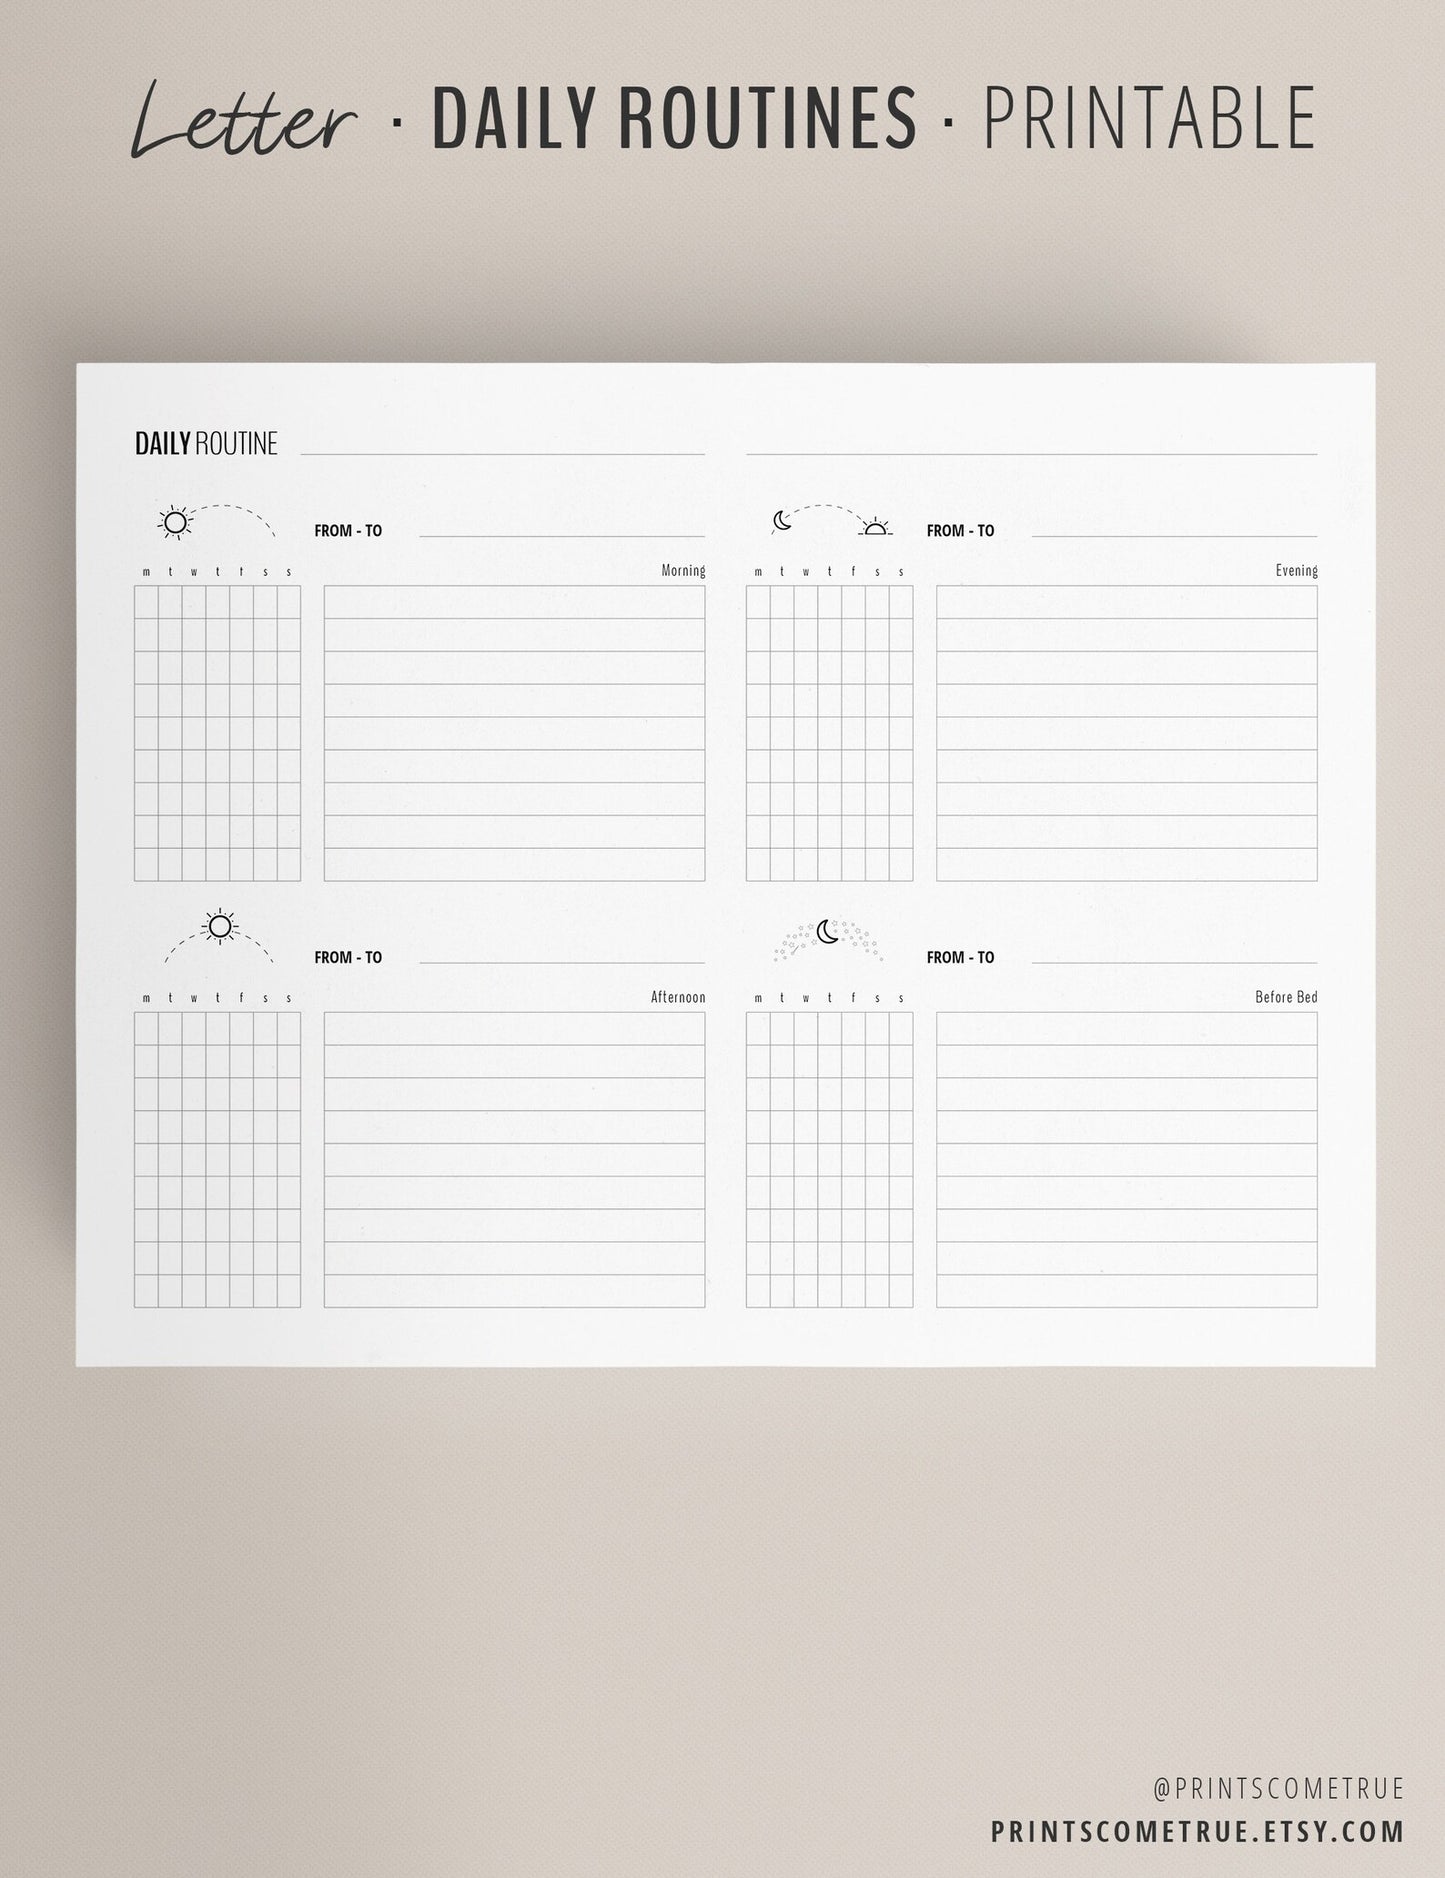 Daily Routine Checklist - Horizontal Editable Letter - 3